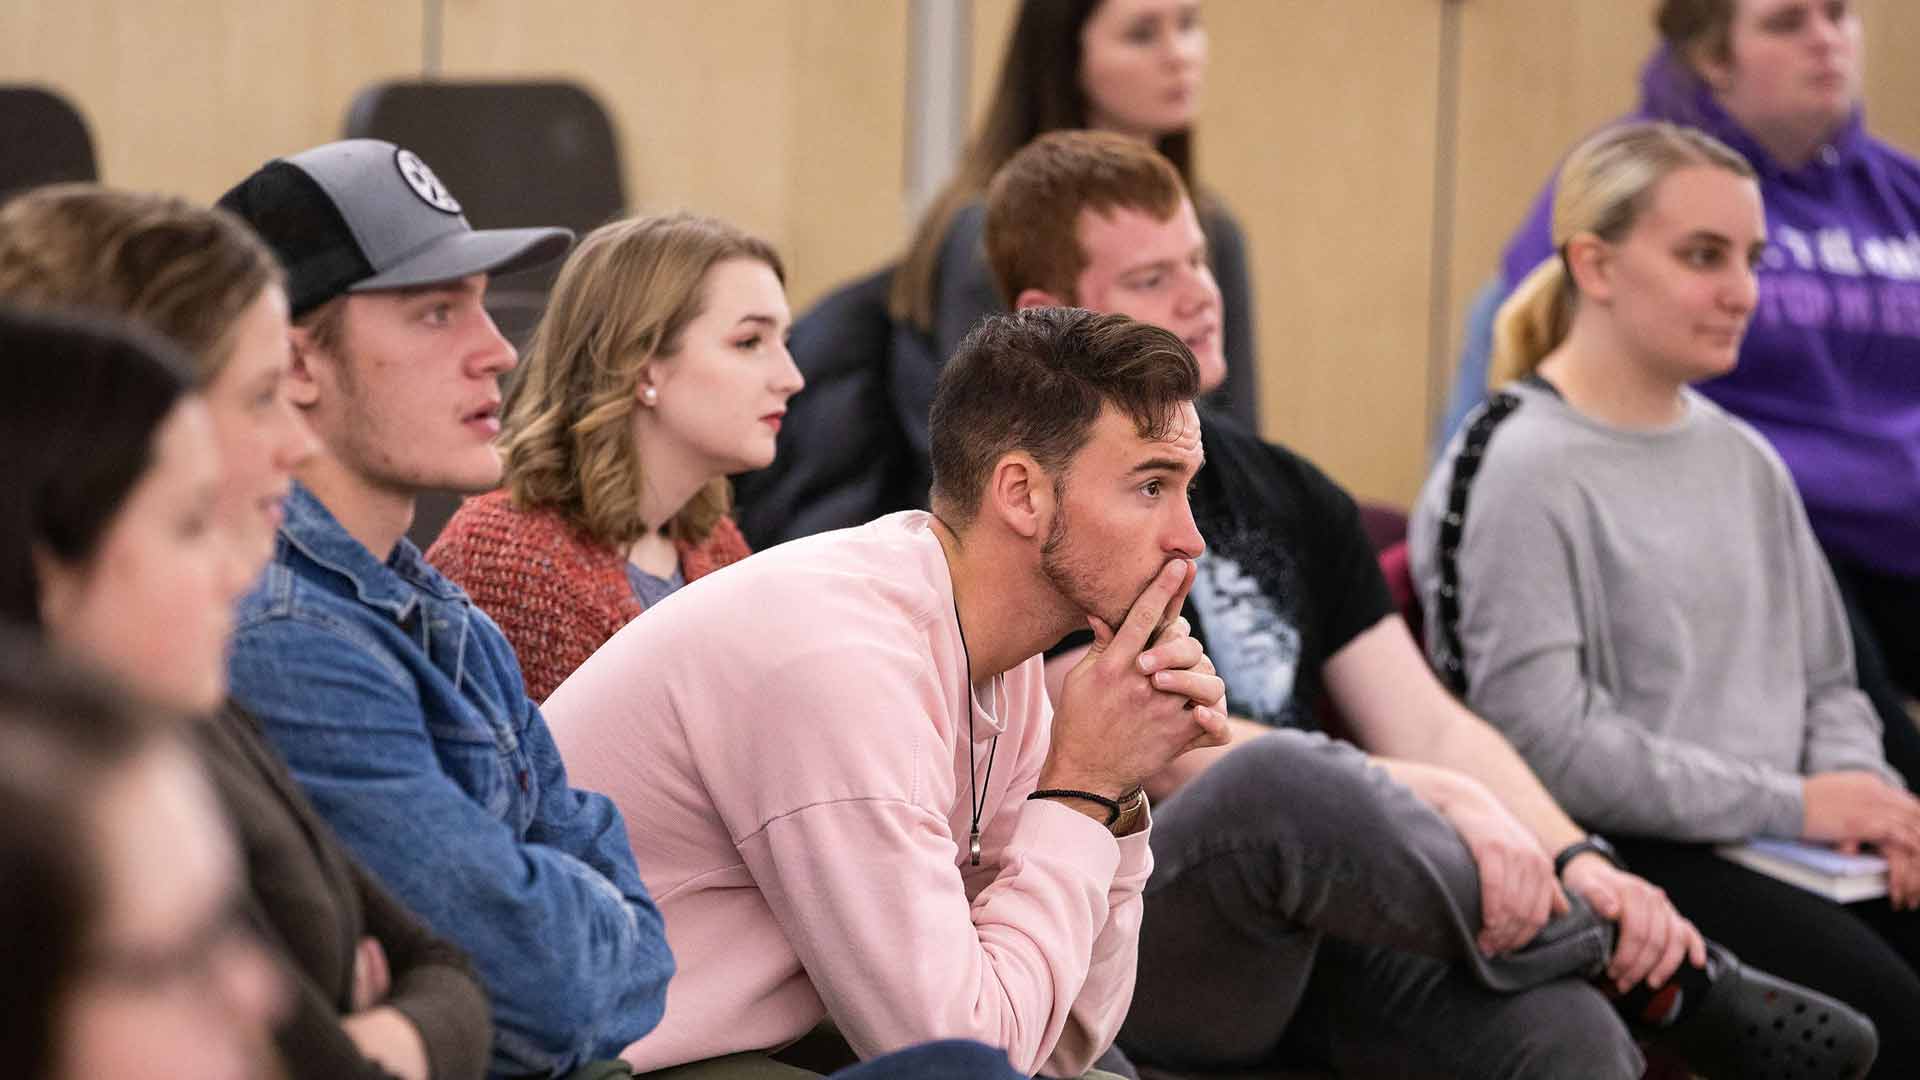 Male student in crowd watches presentation.